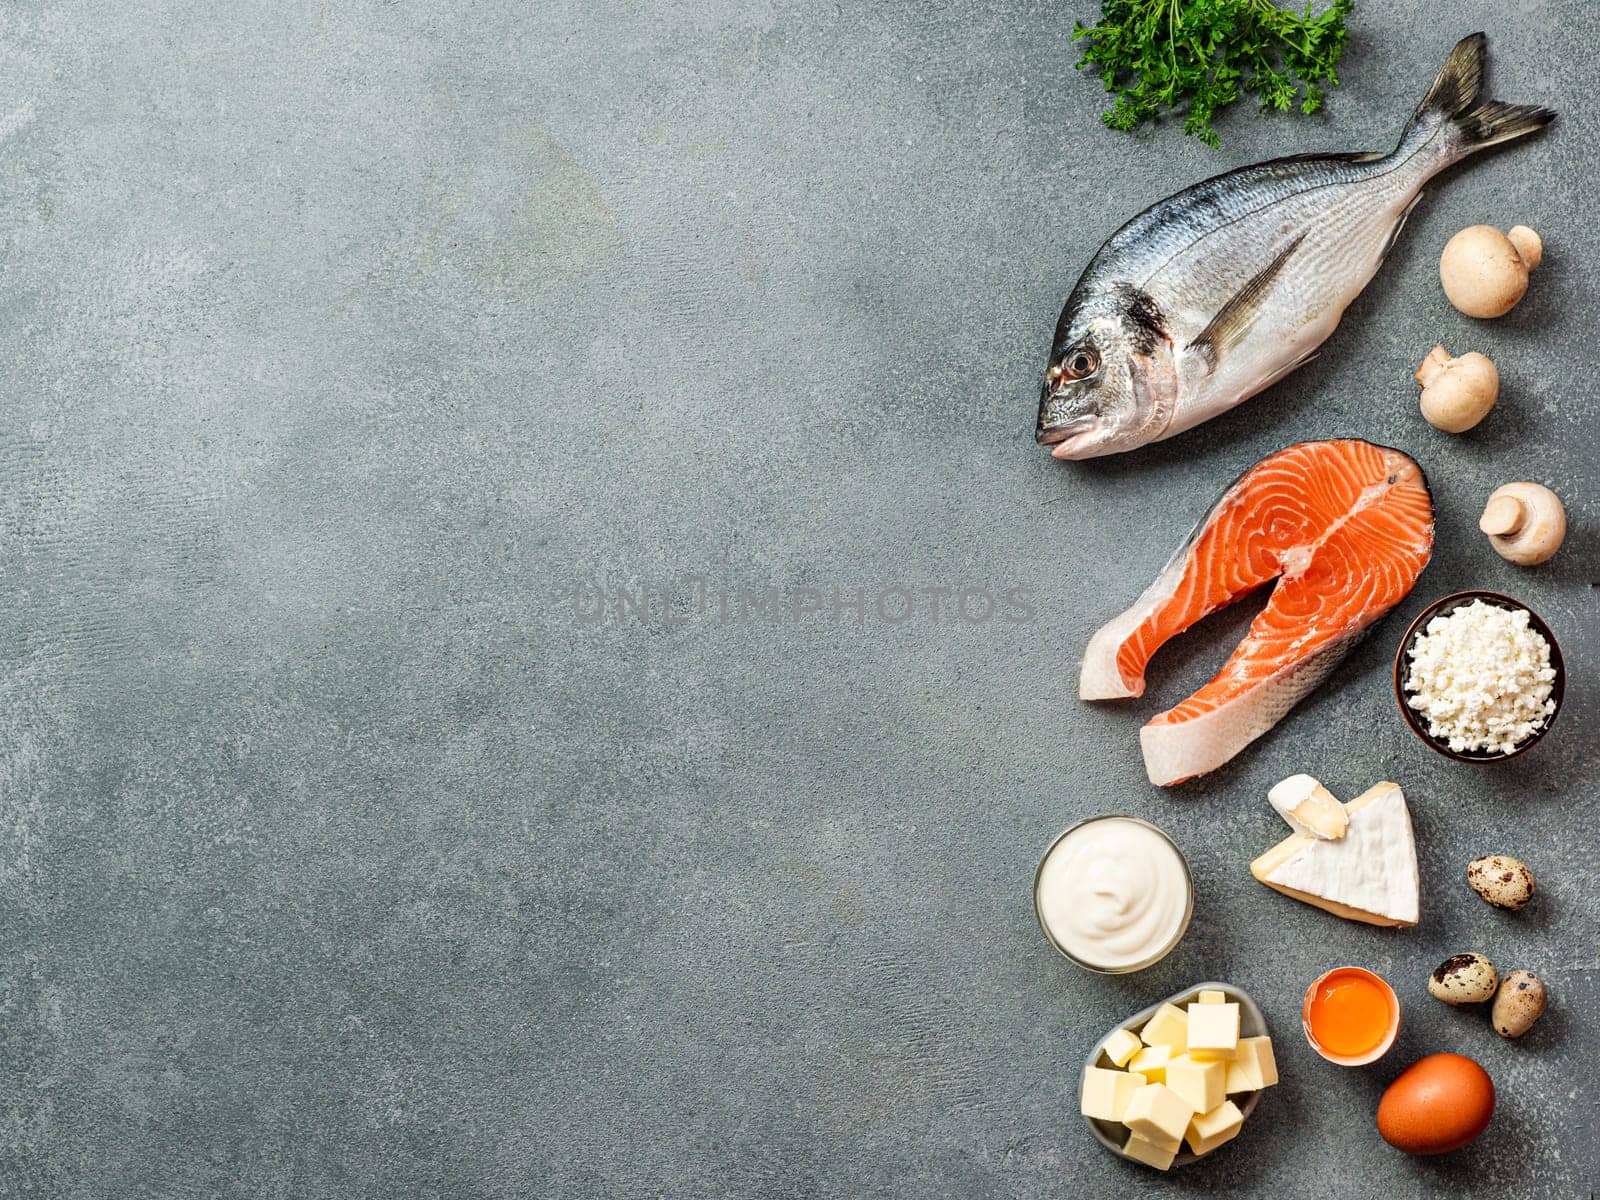 Vaitamin D sources concept with copy space for text. Fish, salmon, dairy products, eggs, mushrooms on gray stone background. Top view or flat lay. Copy space left